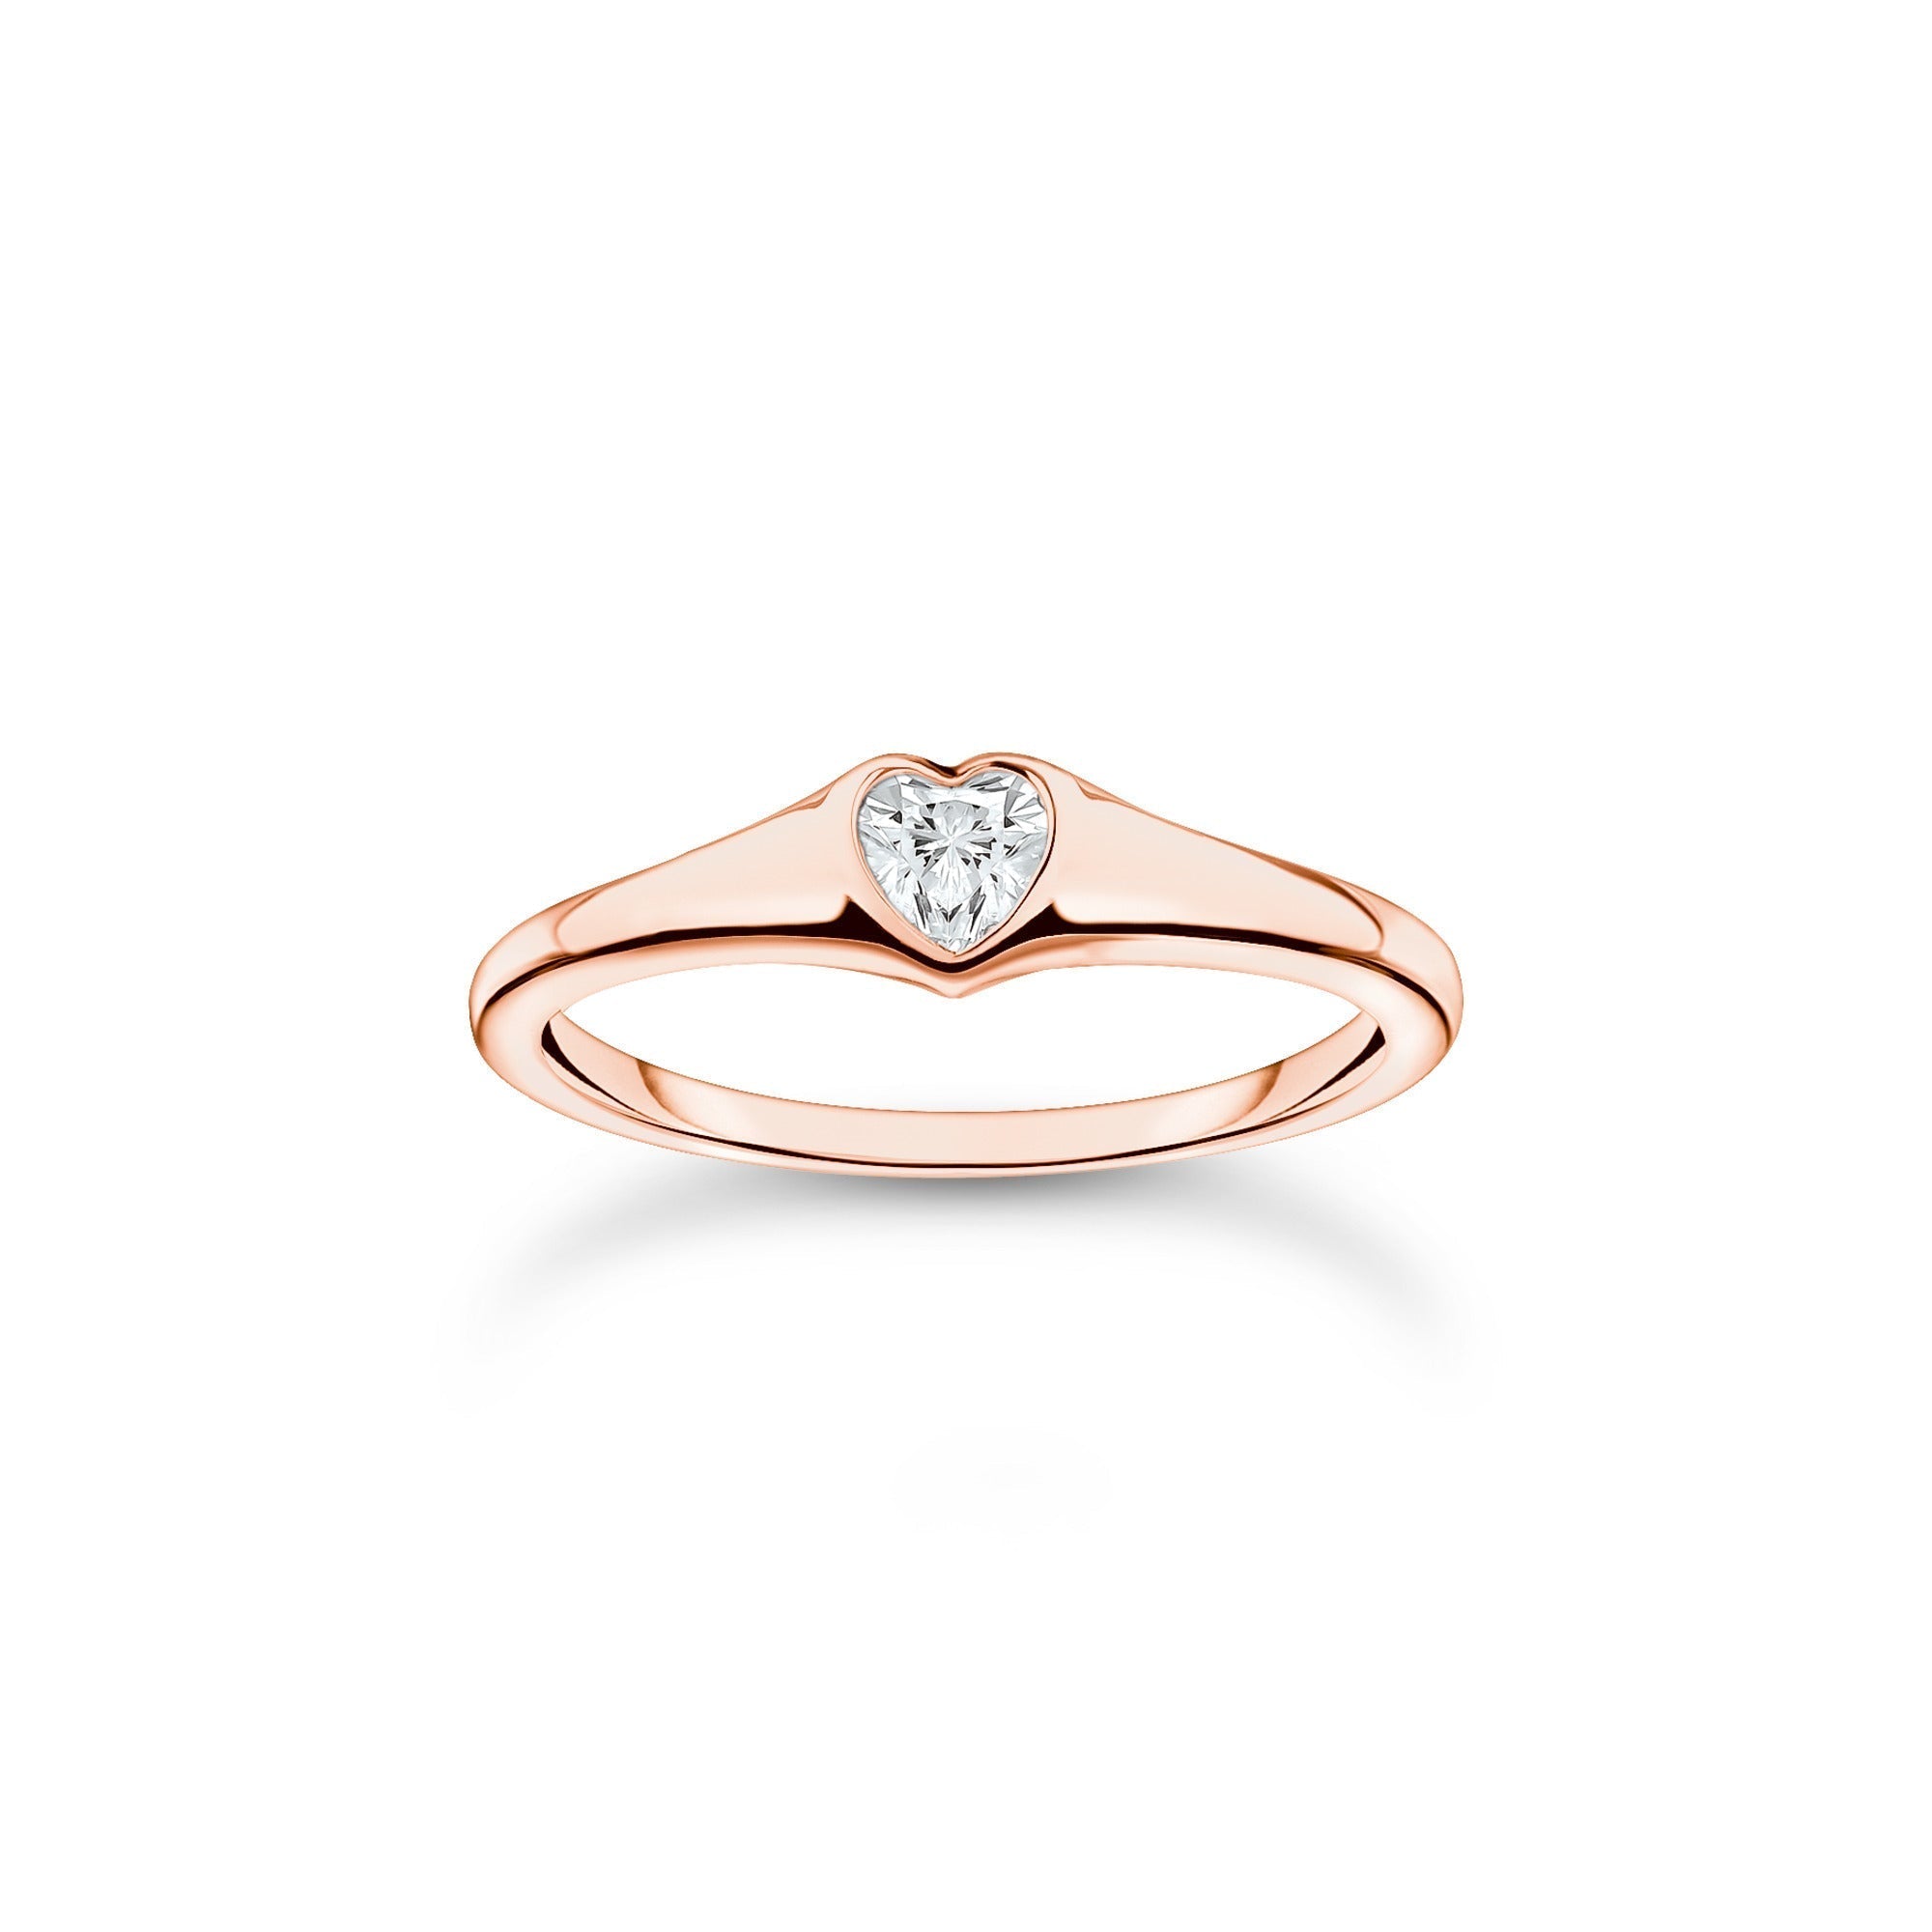 Thomas Sabo Charm Club Rose Gold Plated Sterling Silver Heart Ring